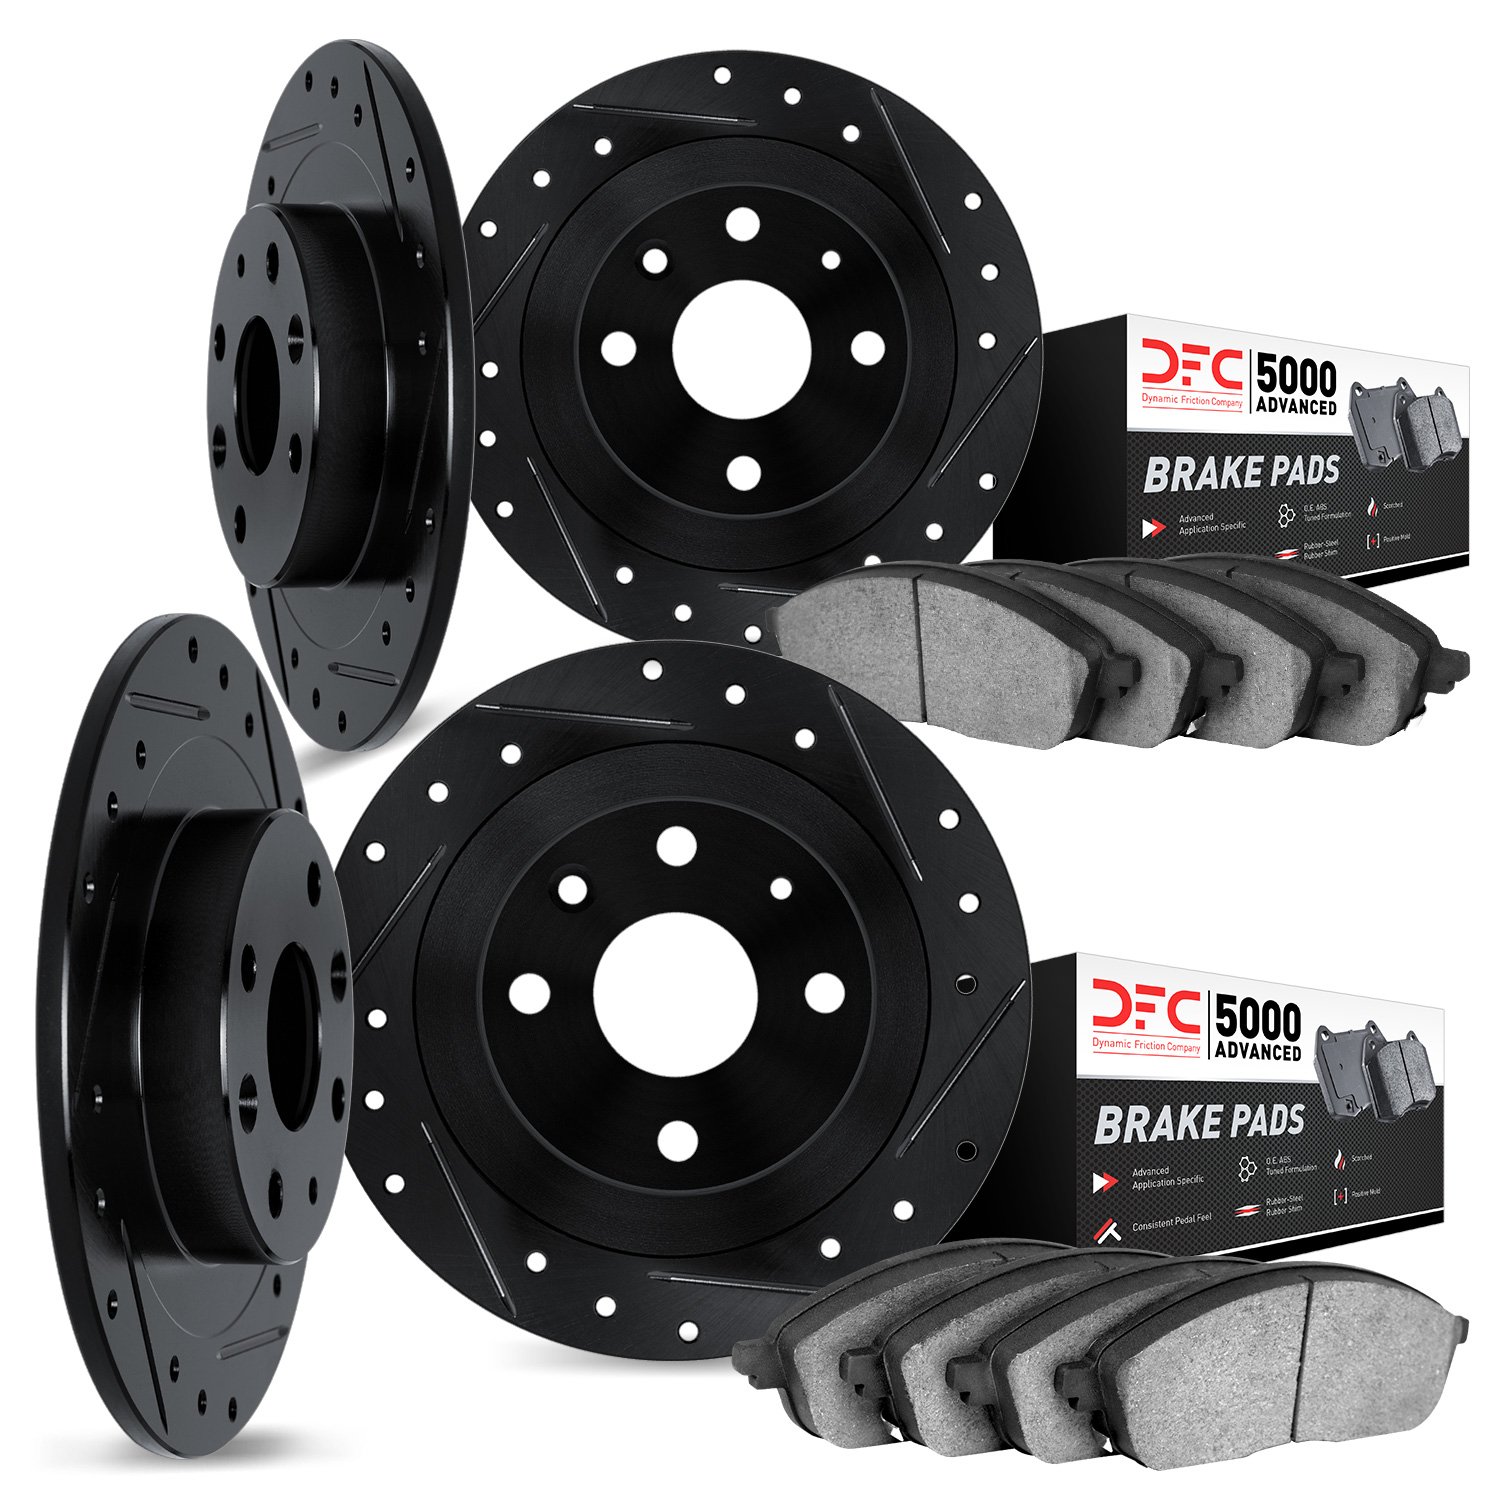 8504-28000 Drilled/Slotted Brake Rotors w/5000 Advanced Brake Pads Kit [Black], 1971-1981 Peugeot, Position: Front and Rear